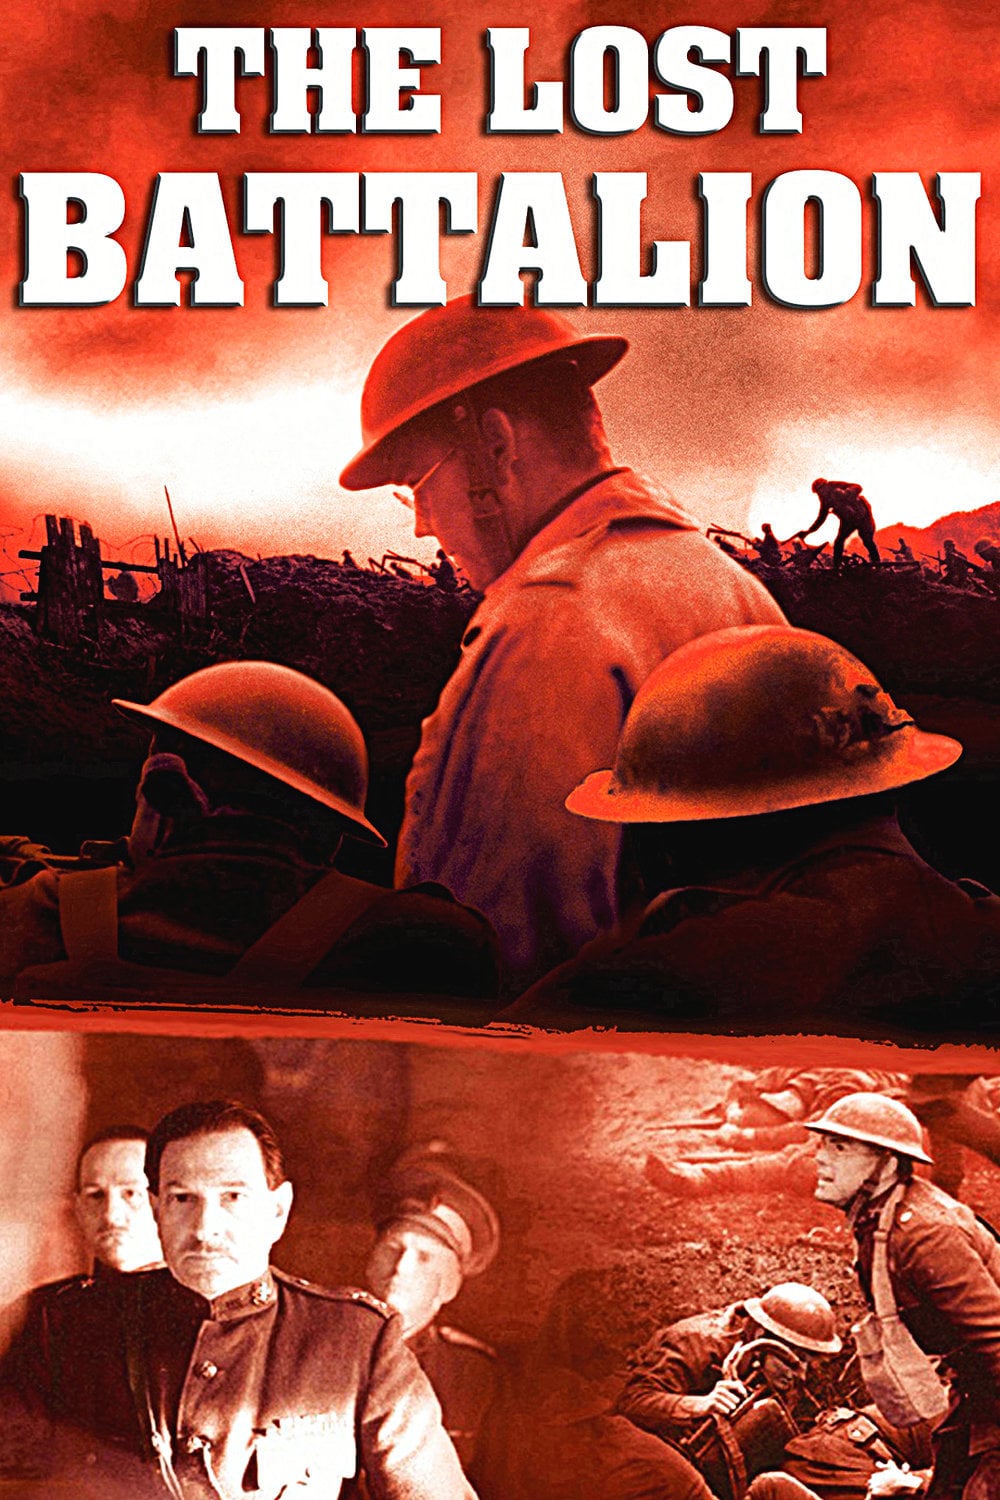 Poster for the movie "The Lost Battalion"